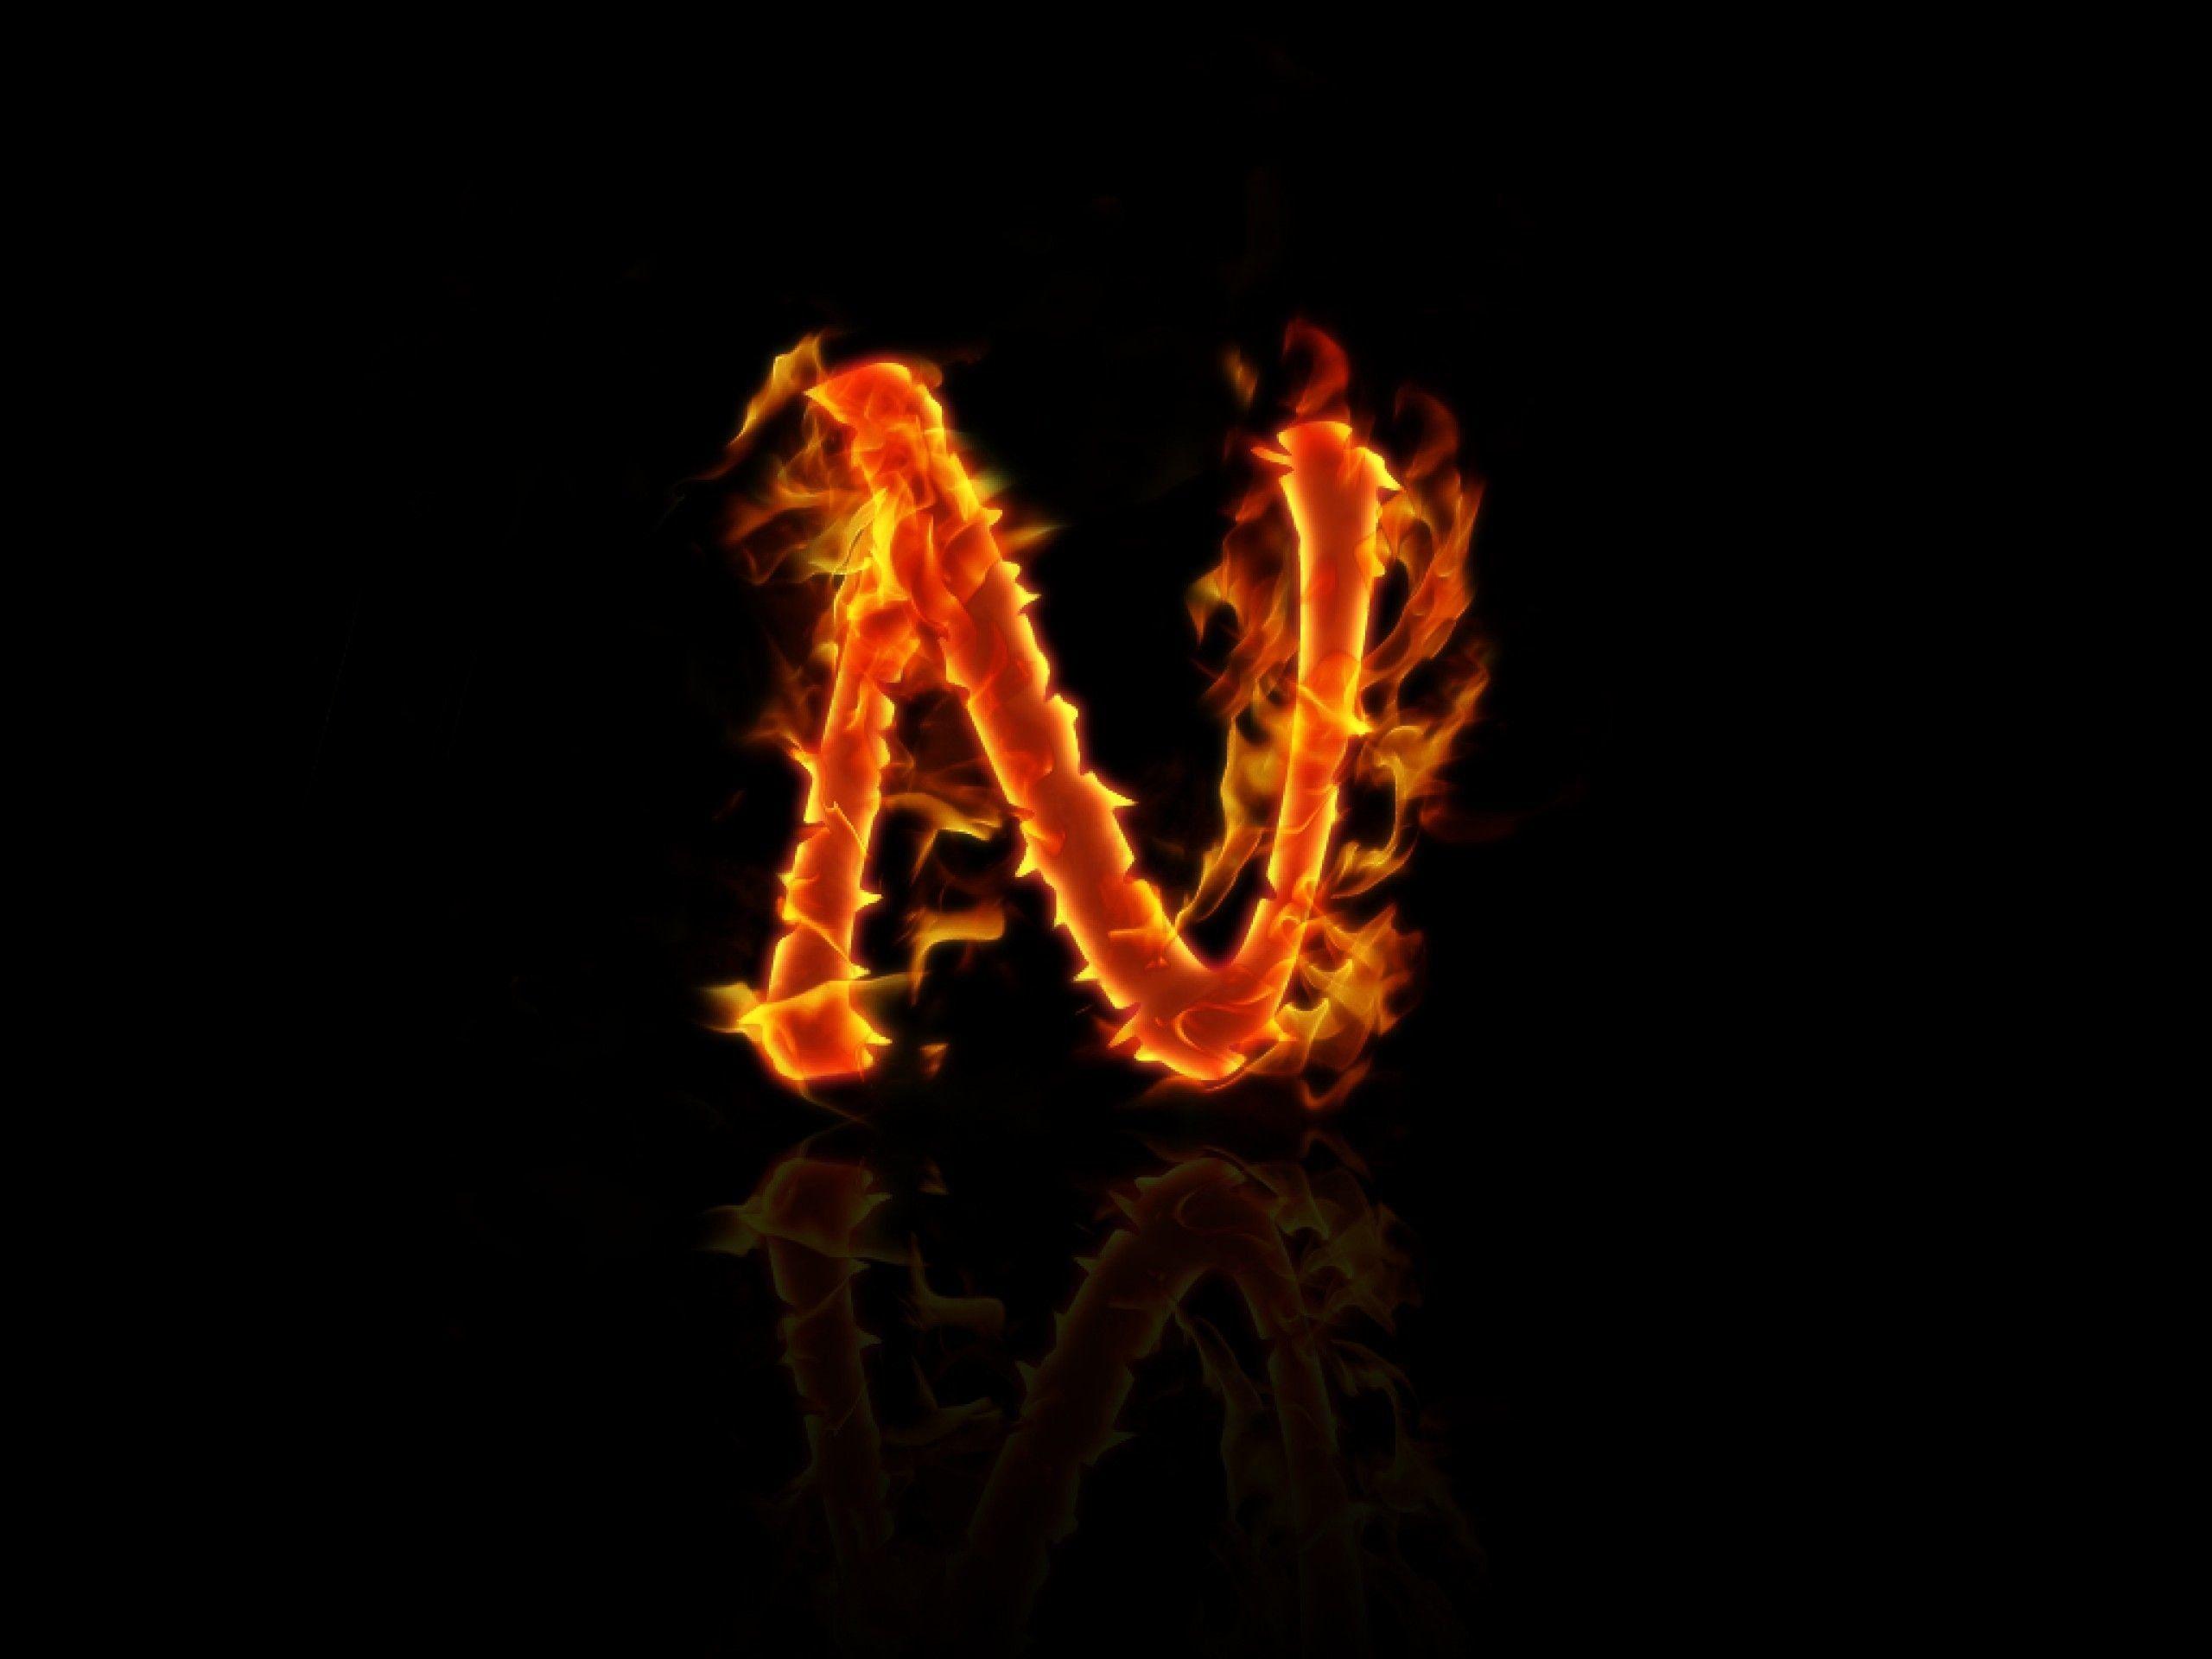 165 Fire Letter N Stock Photos Pictures  RoyaltyFree Images  iStock